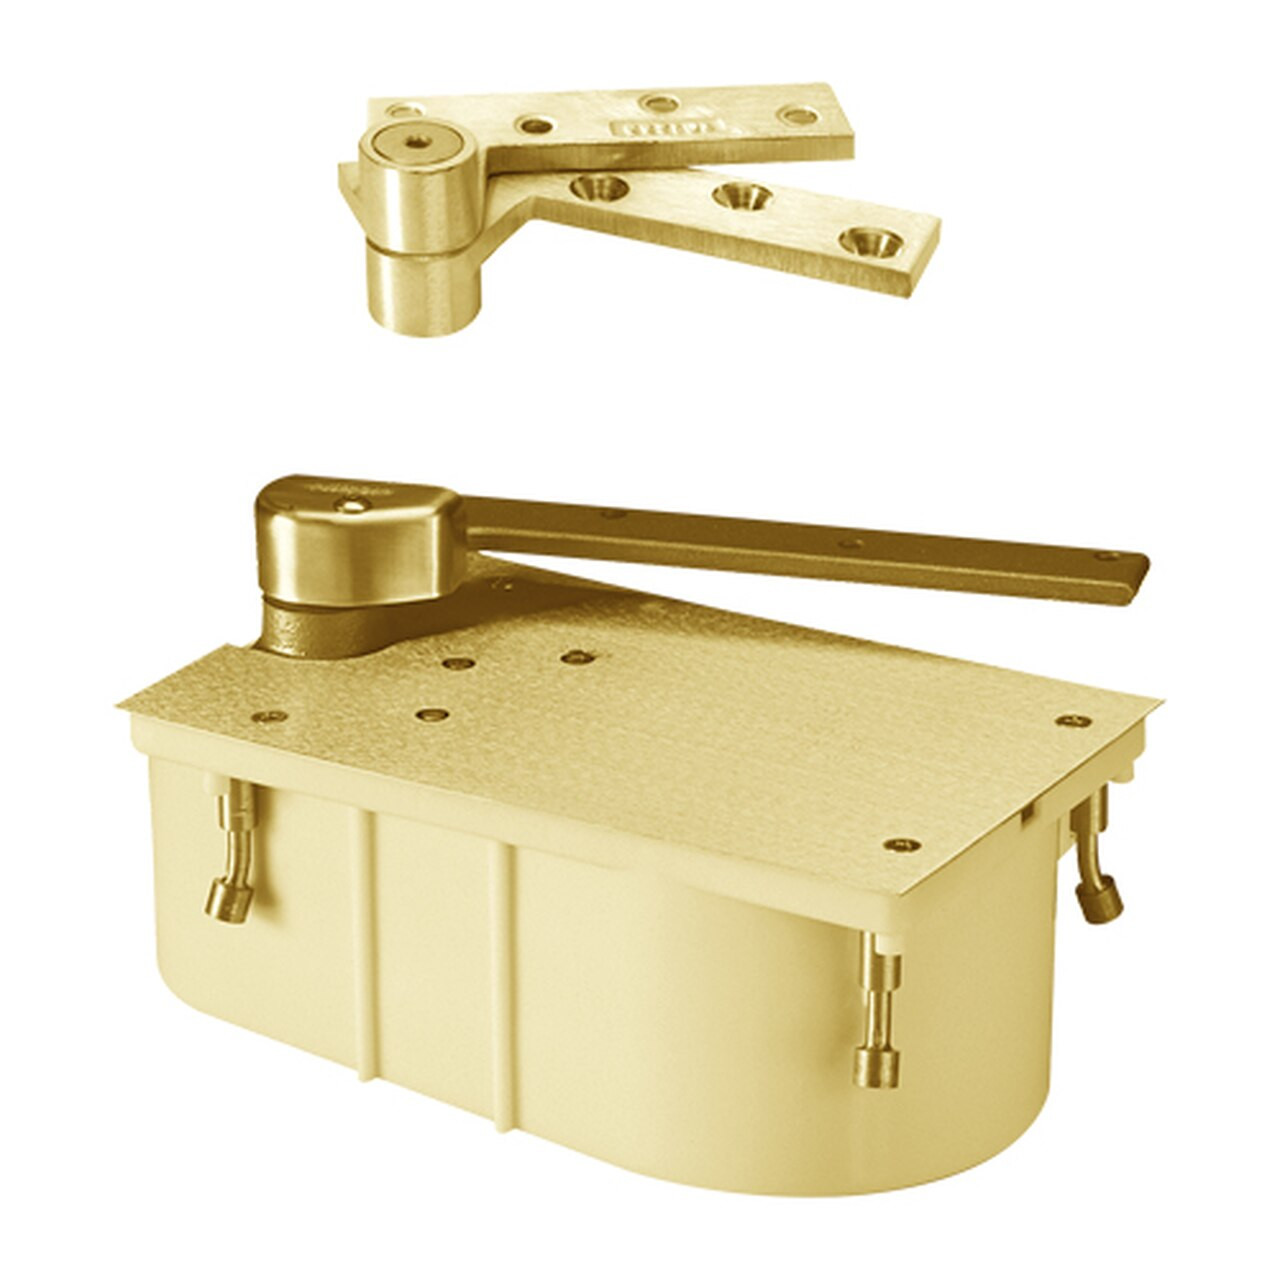 F27-105N-LFP-LCC-LH-605 Rixson 27 Series Fire Rated Heavy Duty 3/4" Offset Hung Floor Closer in Bright Brass Finish